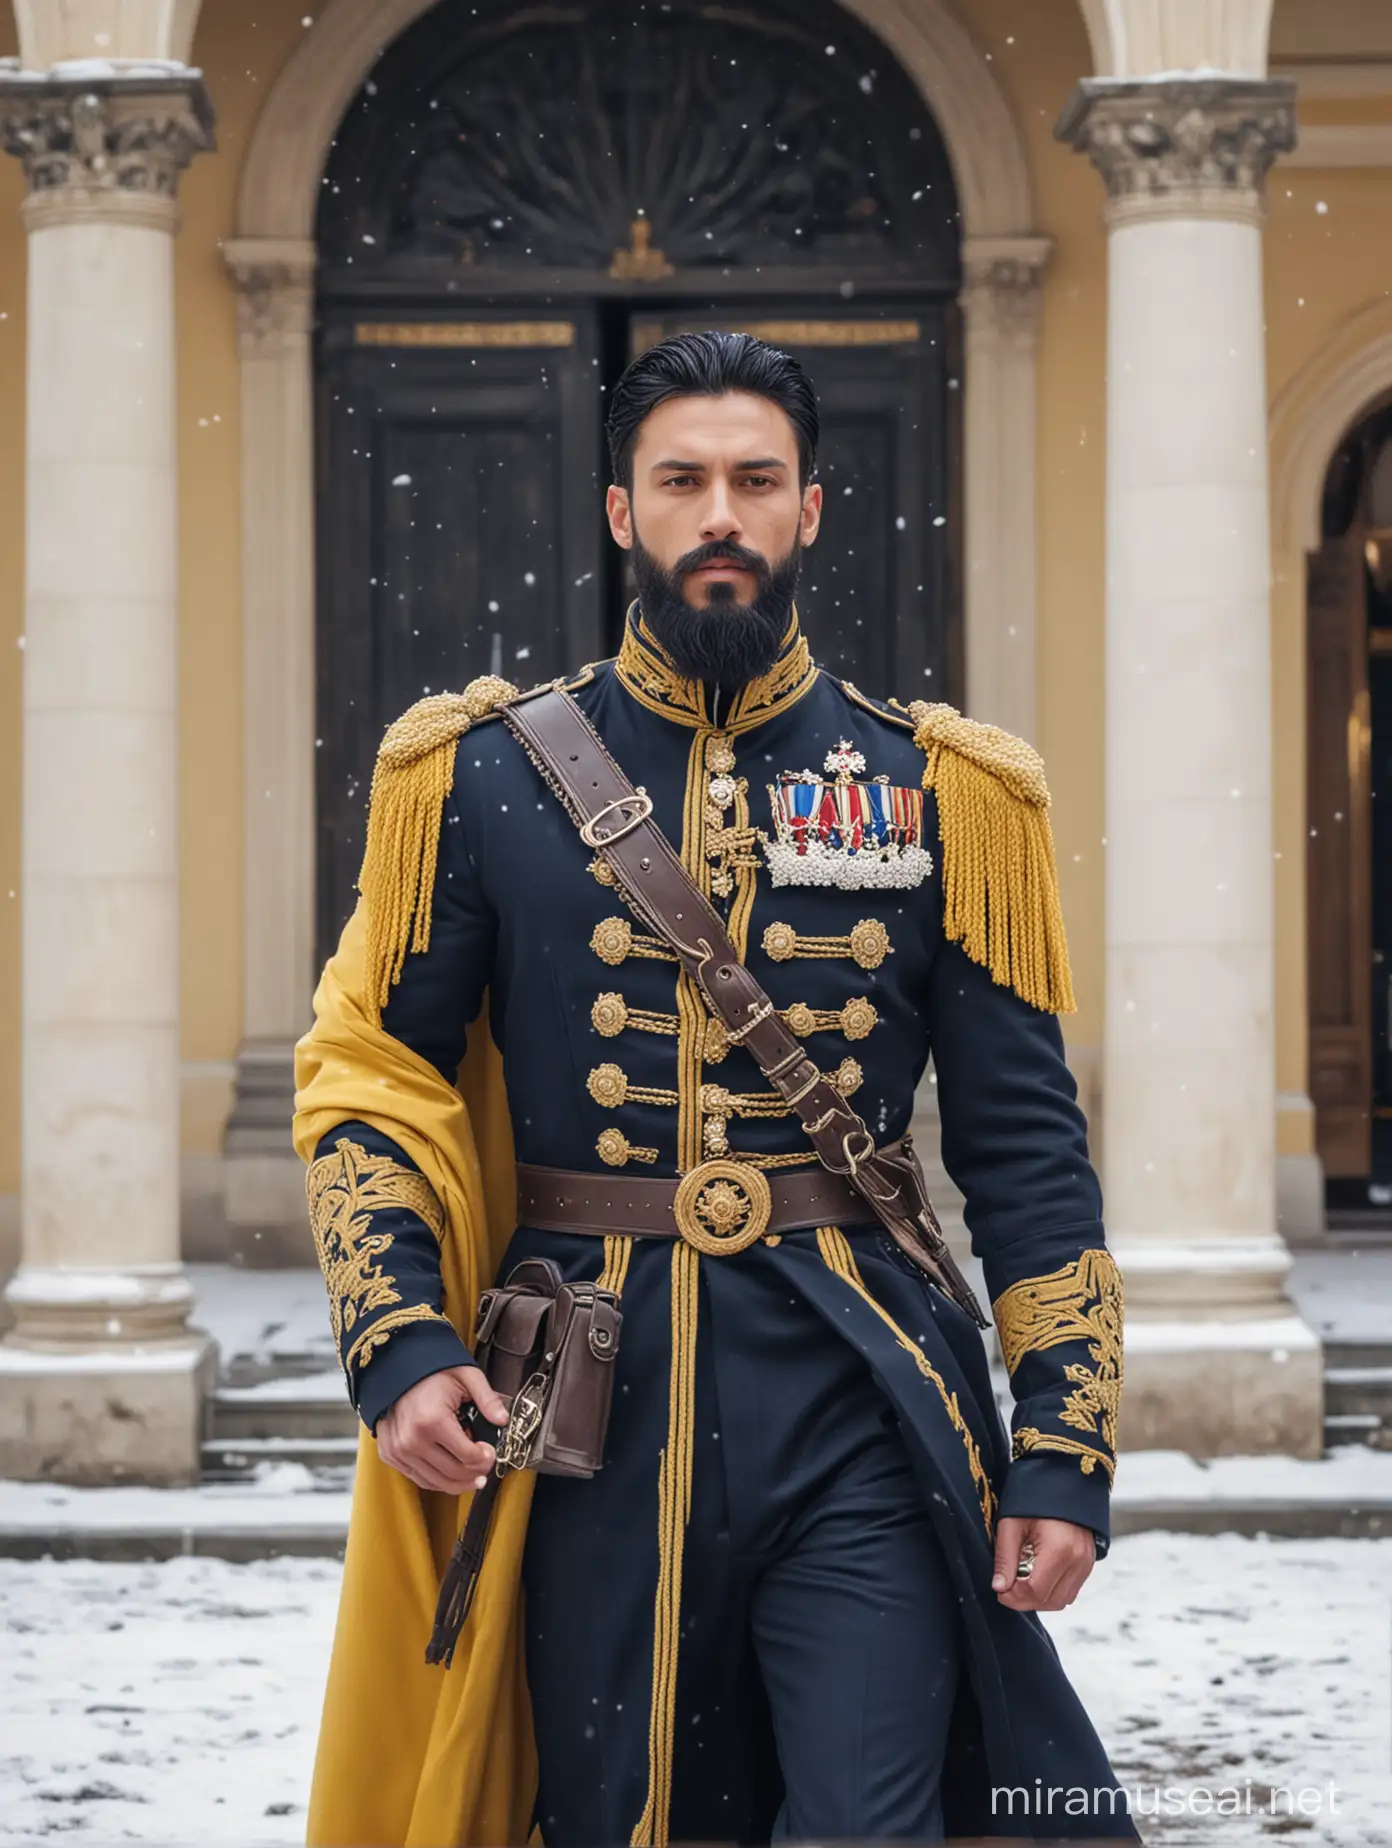 Tall and handsome muscular king with beautiful black hairstyle and beard with attractive eyes and Big wide shoulder in Navy cavalry suit with Coat walking out on yellow carpet outside snowy palace